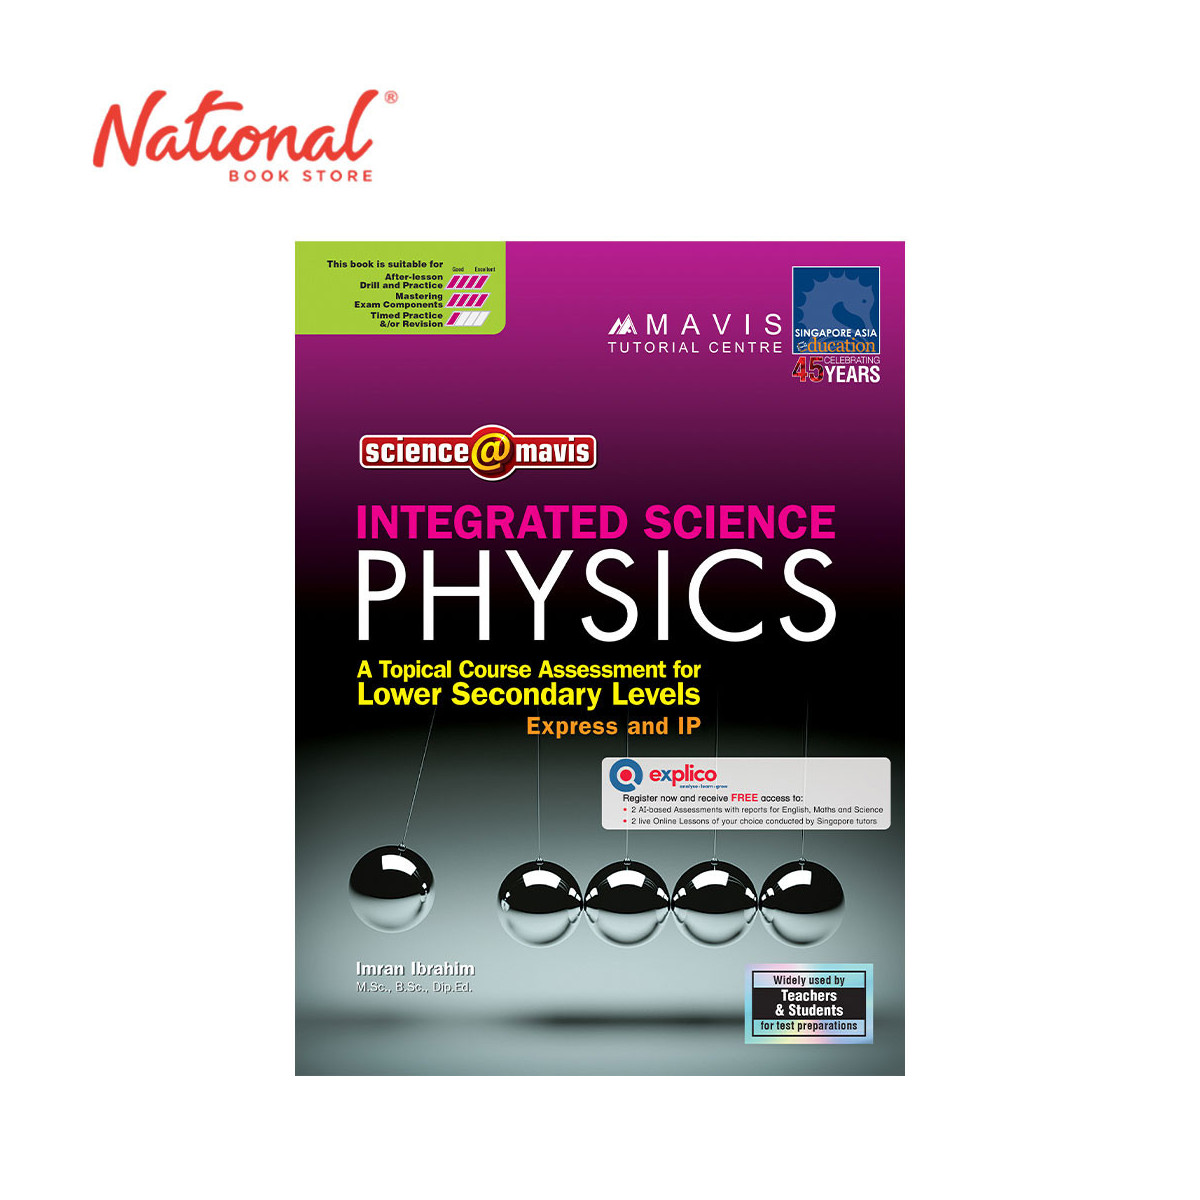 *SPECIAL ORDER* Integrated Science Physics Lower Secondary Levels by Imran Ibrahim - Trade Paperback - High School